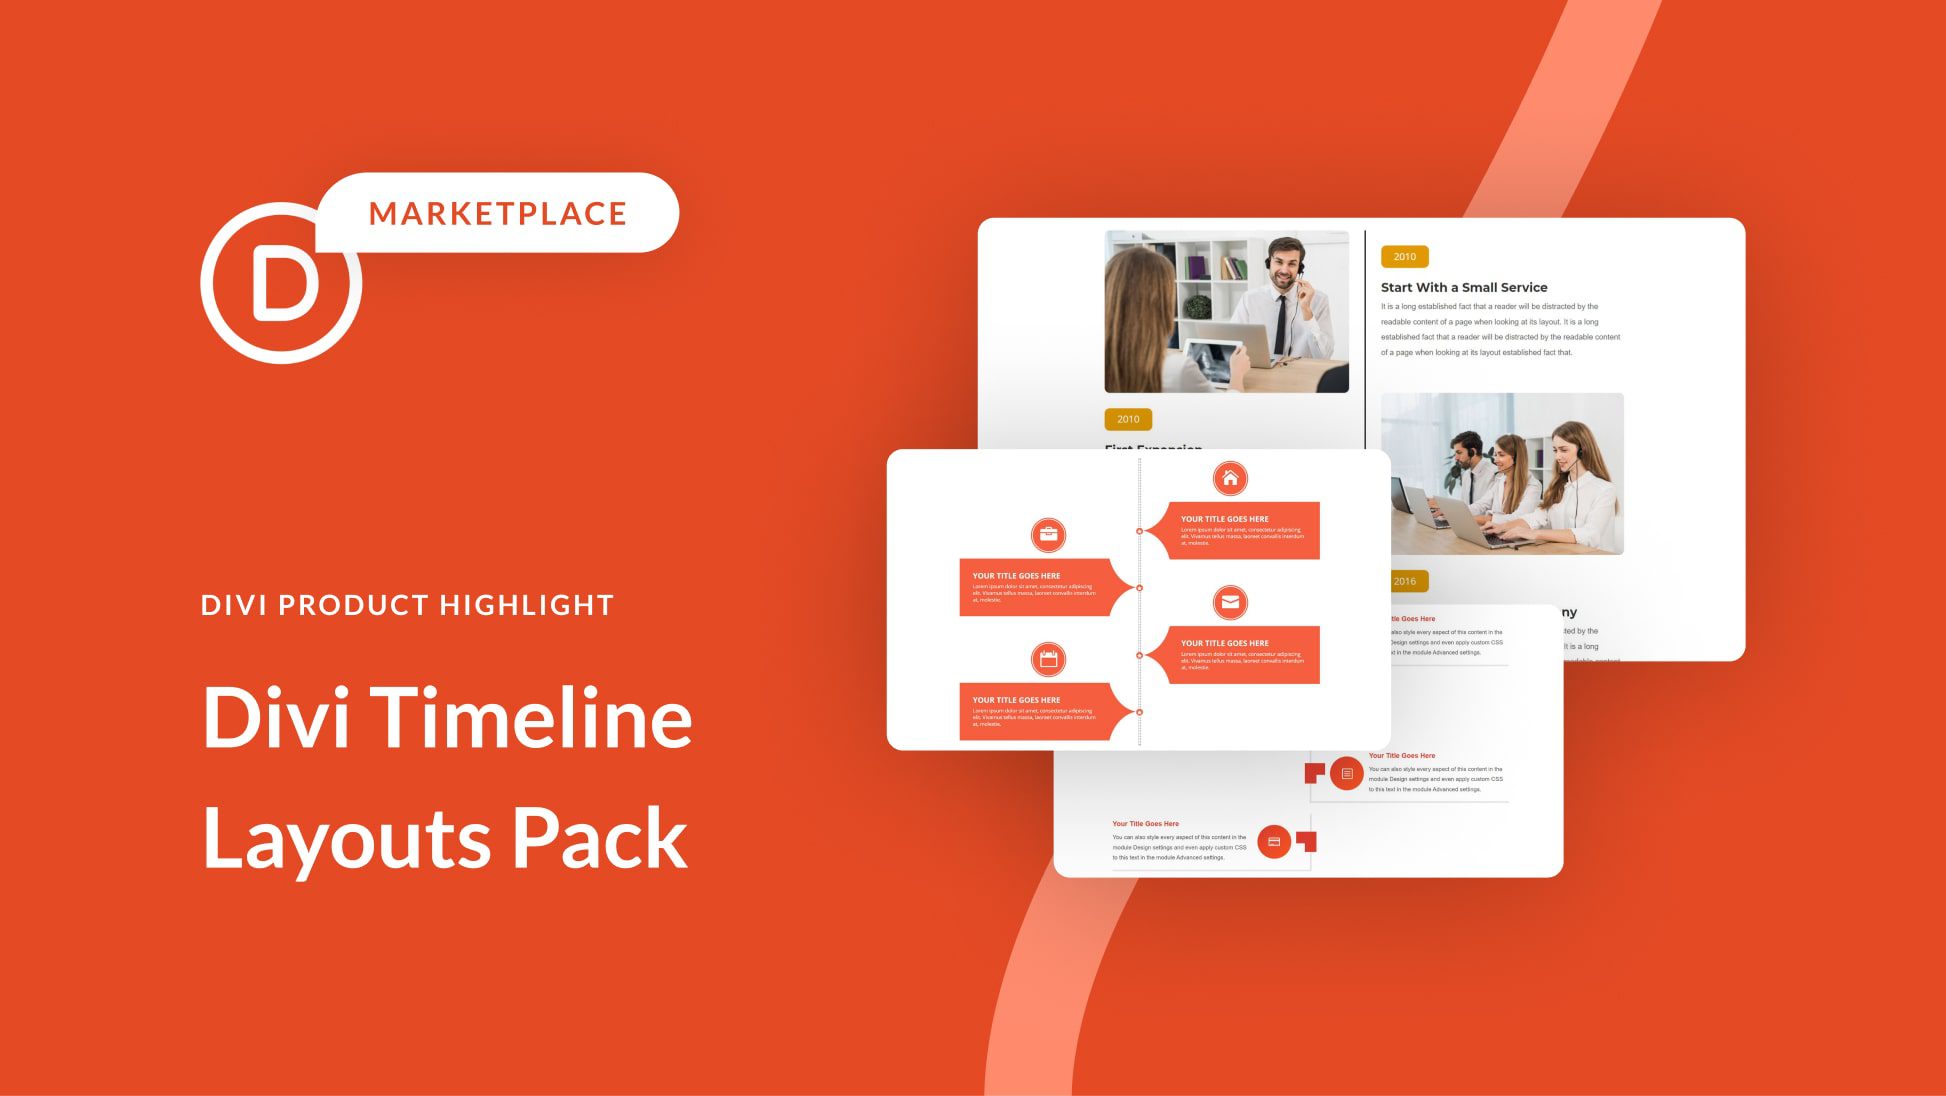 Divi Product Highlight: Divi Timeline Layouts Pack